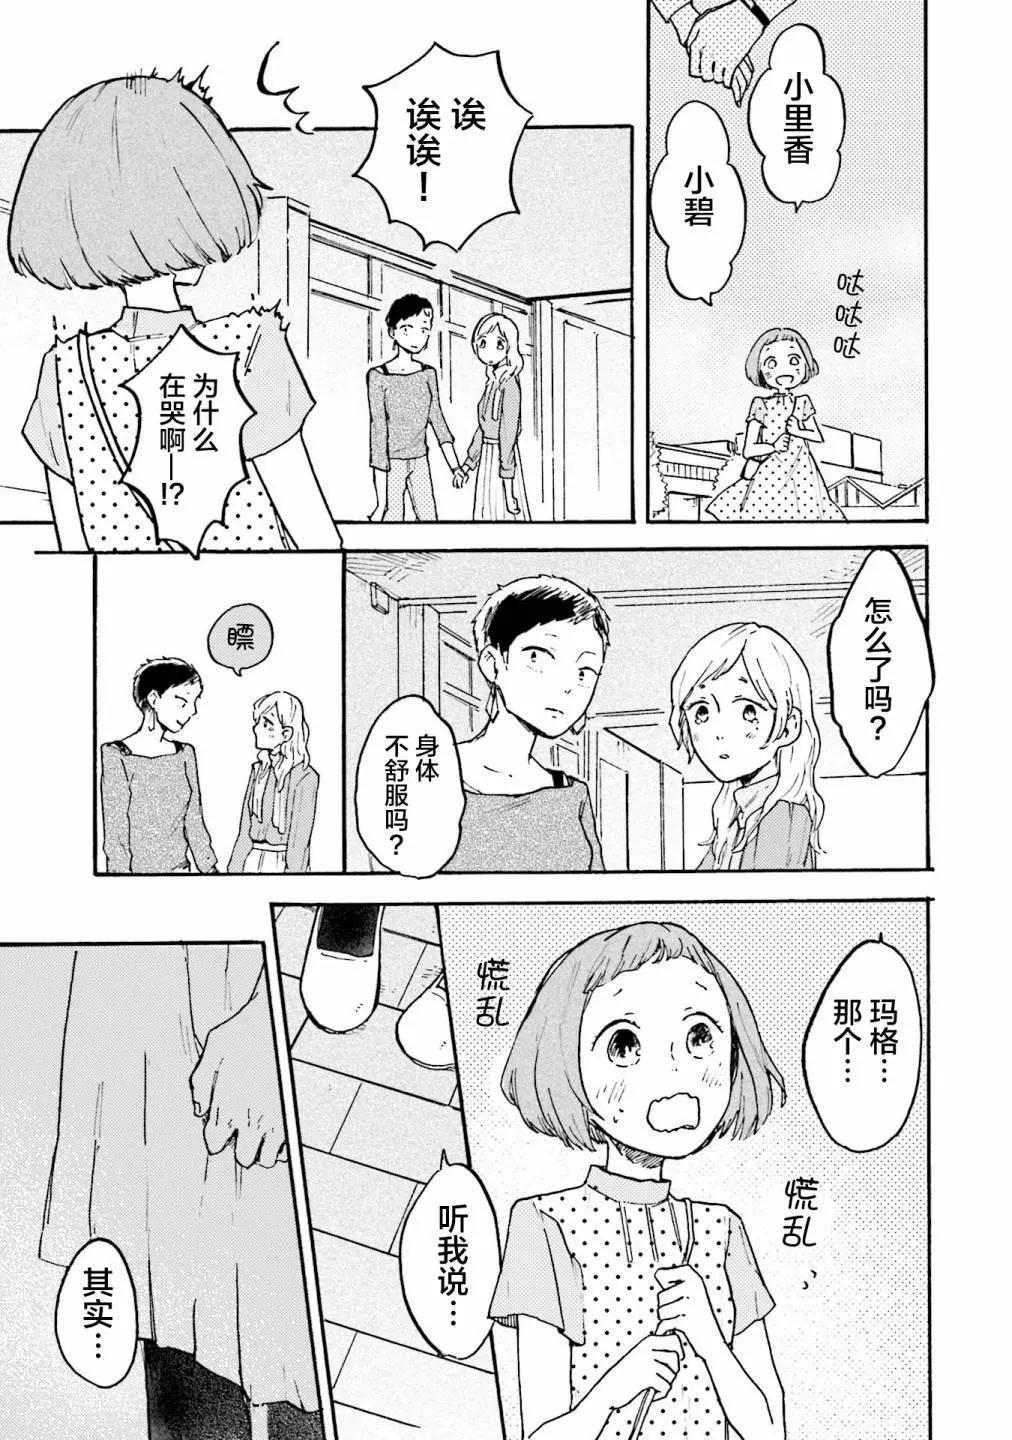 Colorless Girl - 第02話 - 5